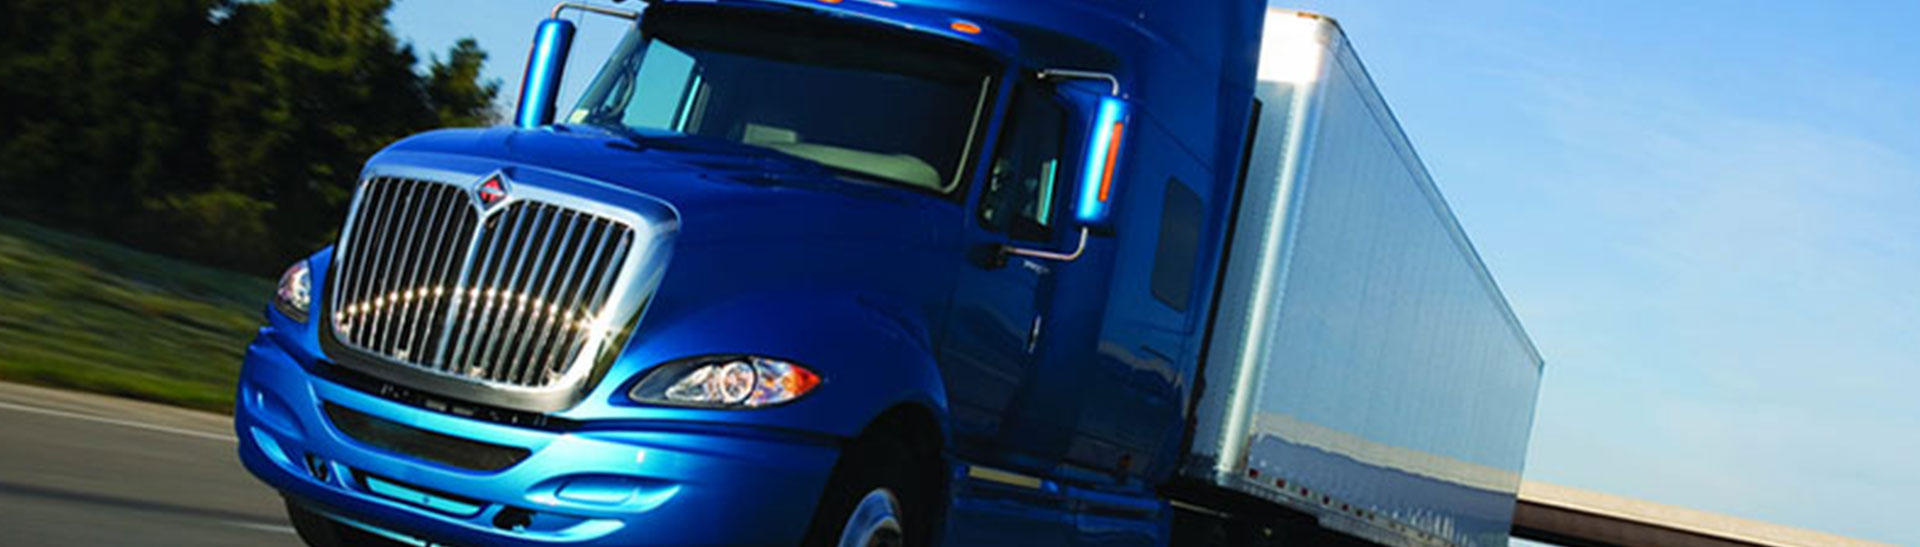 Evanston Trucking Services, Logistics Services and Trucking Company